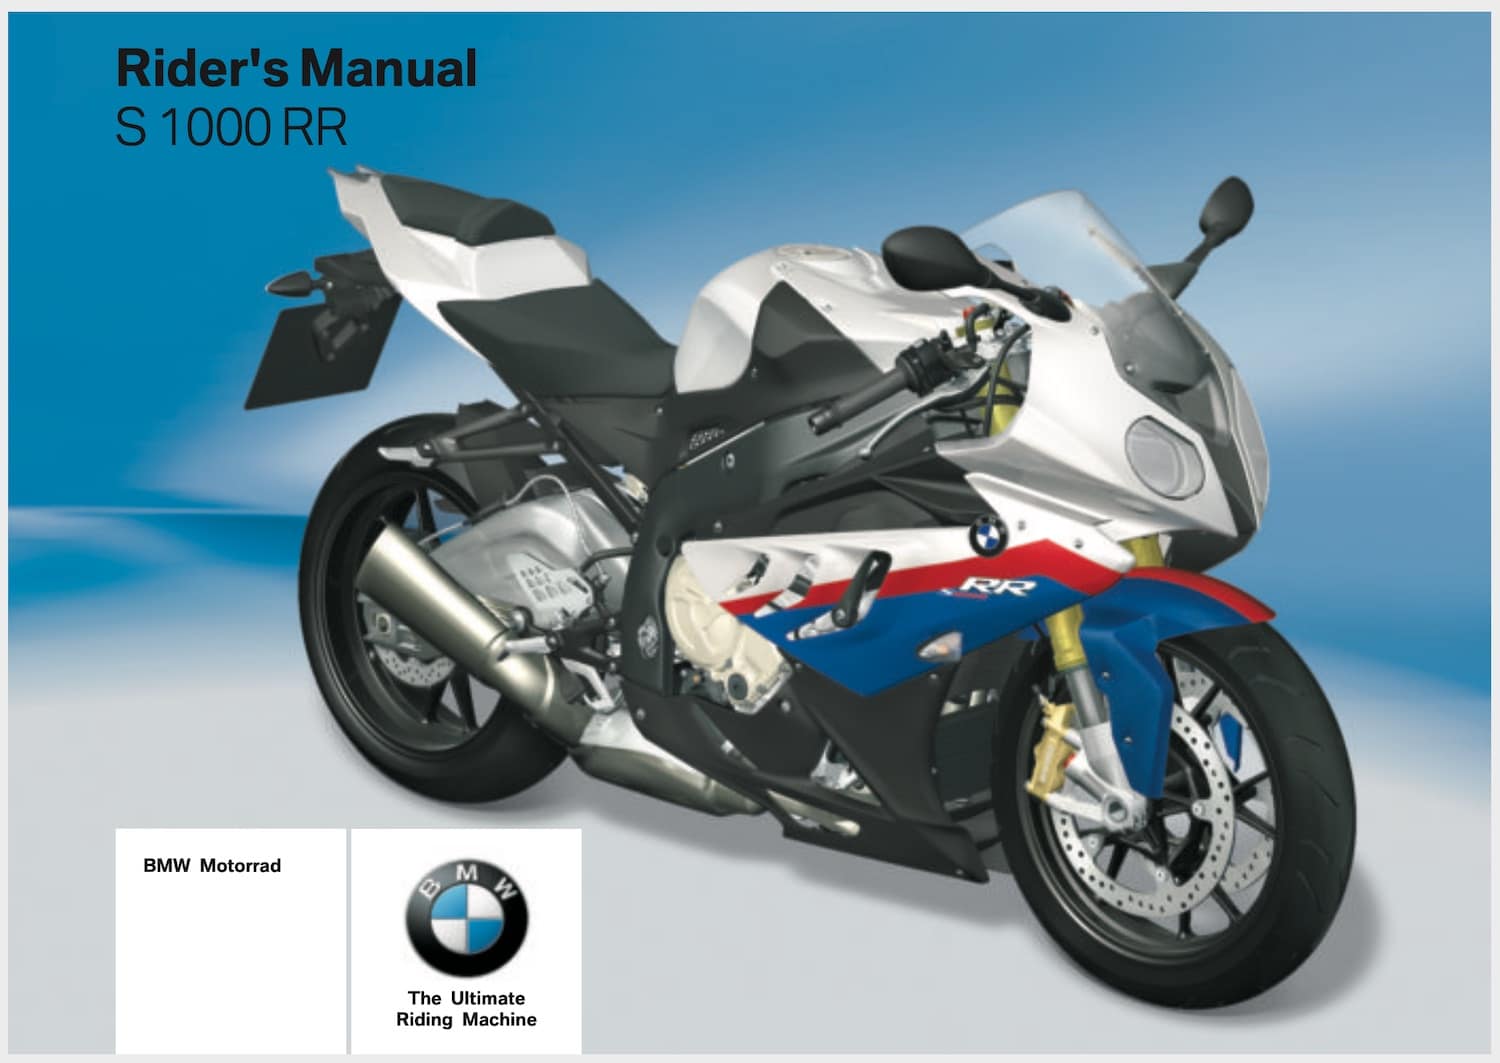 14 Surprising Things I Learned from the BMW S1000RR manual